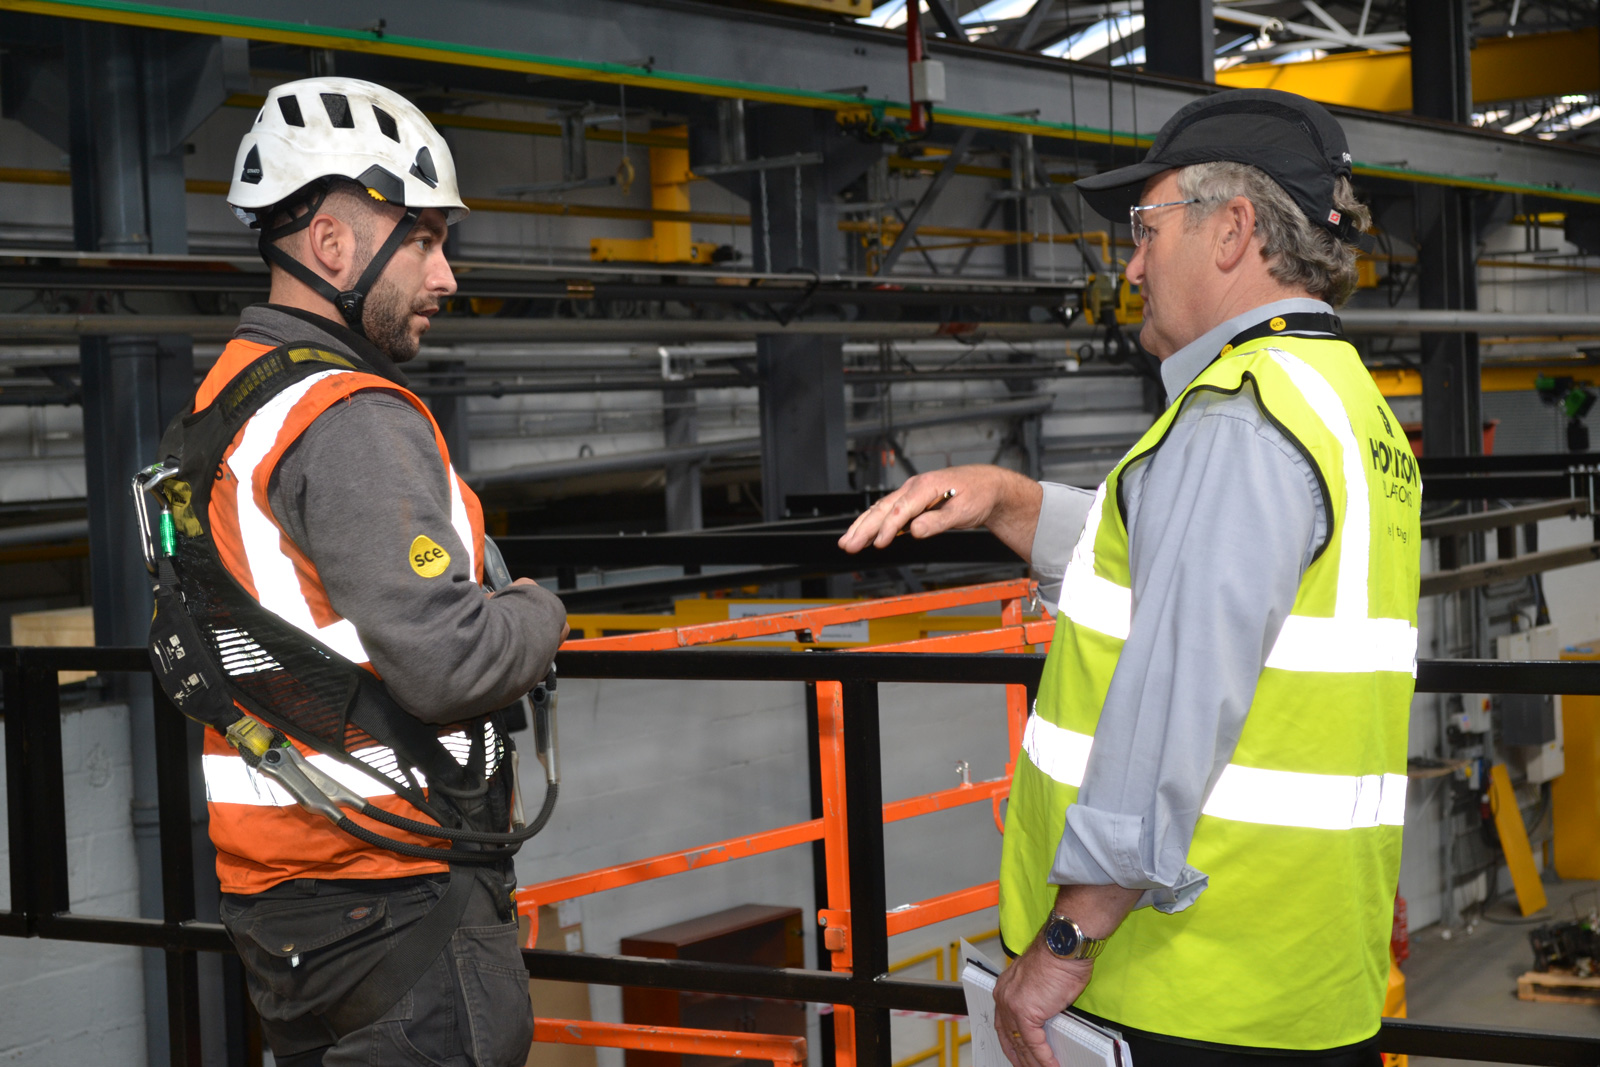 Customer Oriented Training Course on IOSH Working Safely